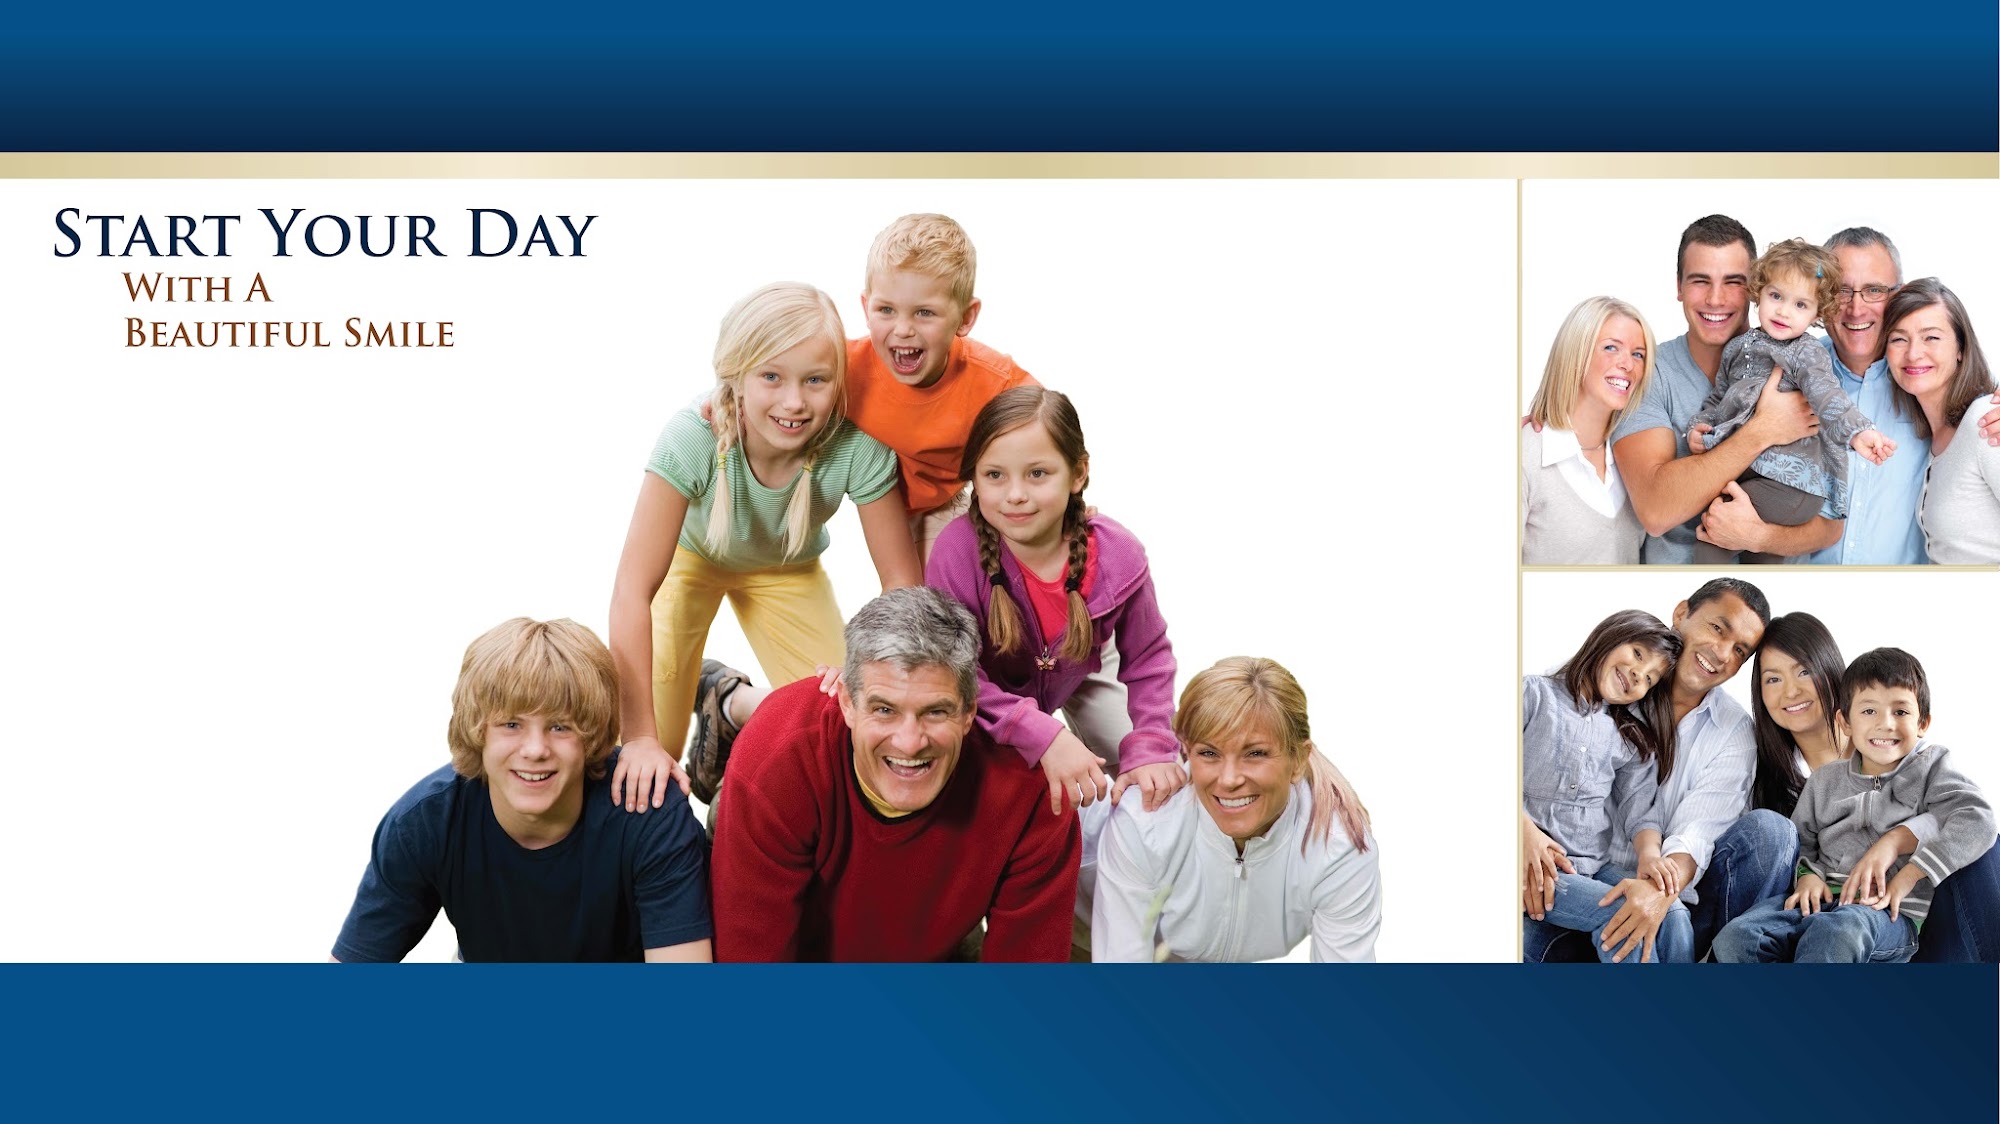 Family Dental Care of Fitchburg